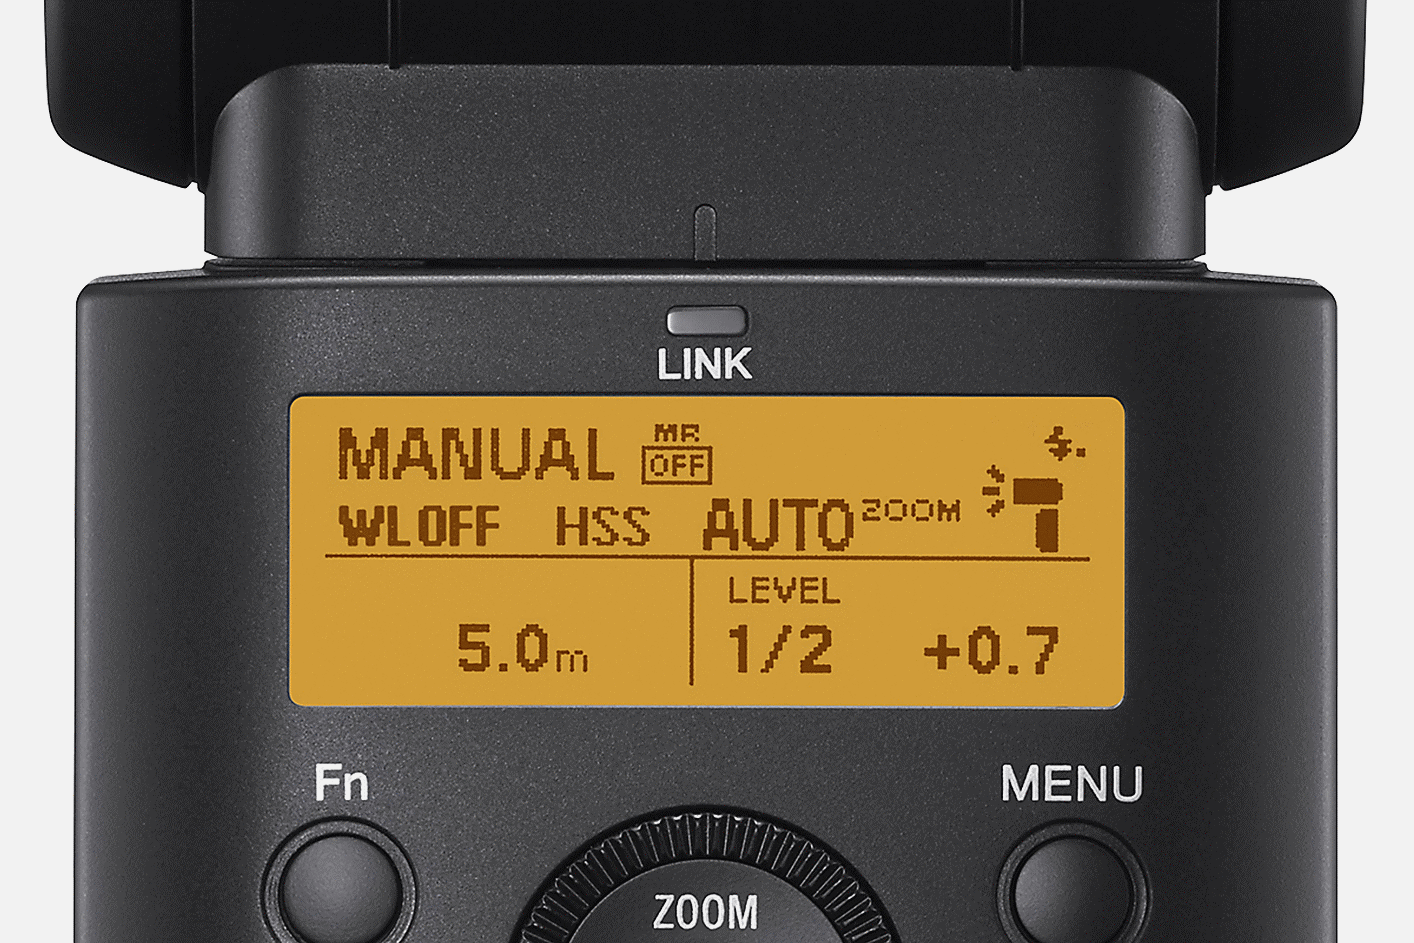 Close-up image of the product display provides status info, assignable arrow key and control wheel